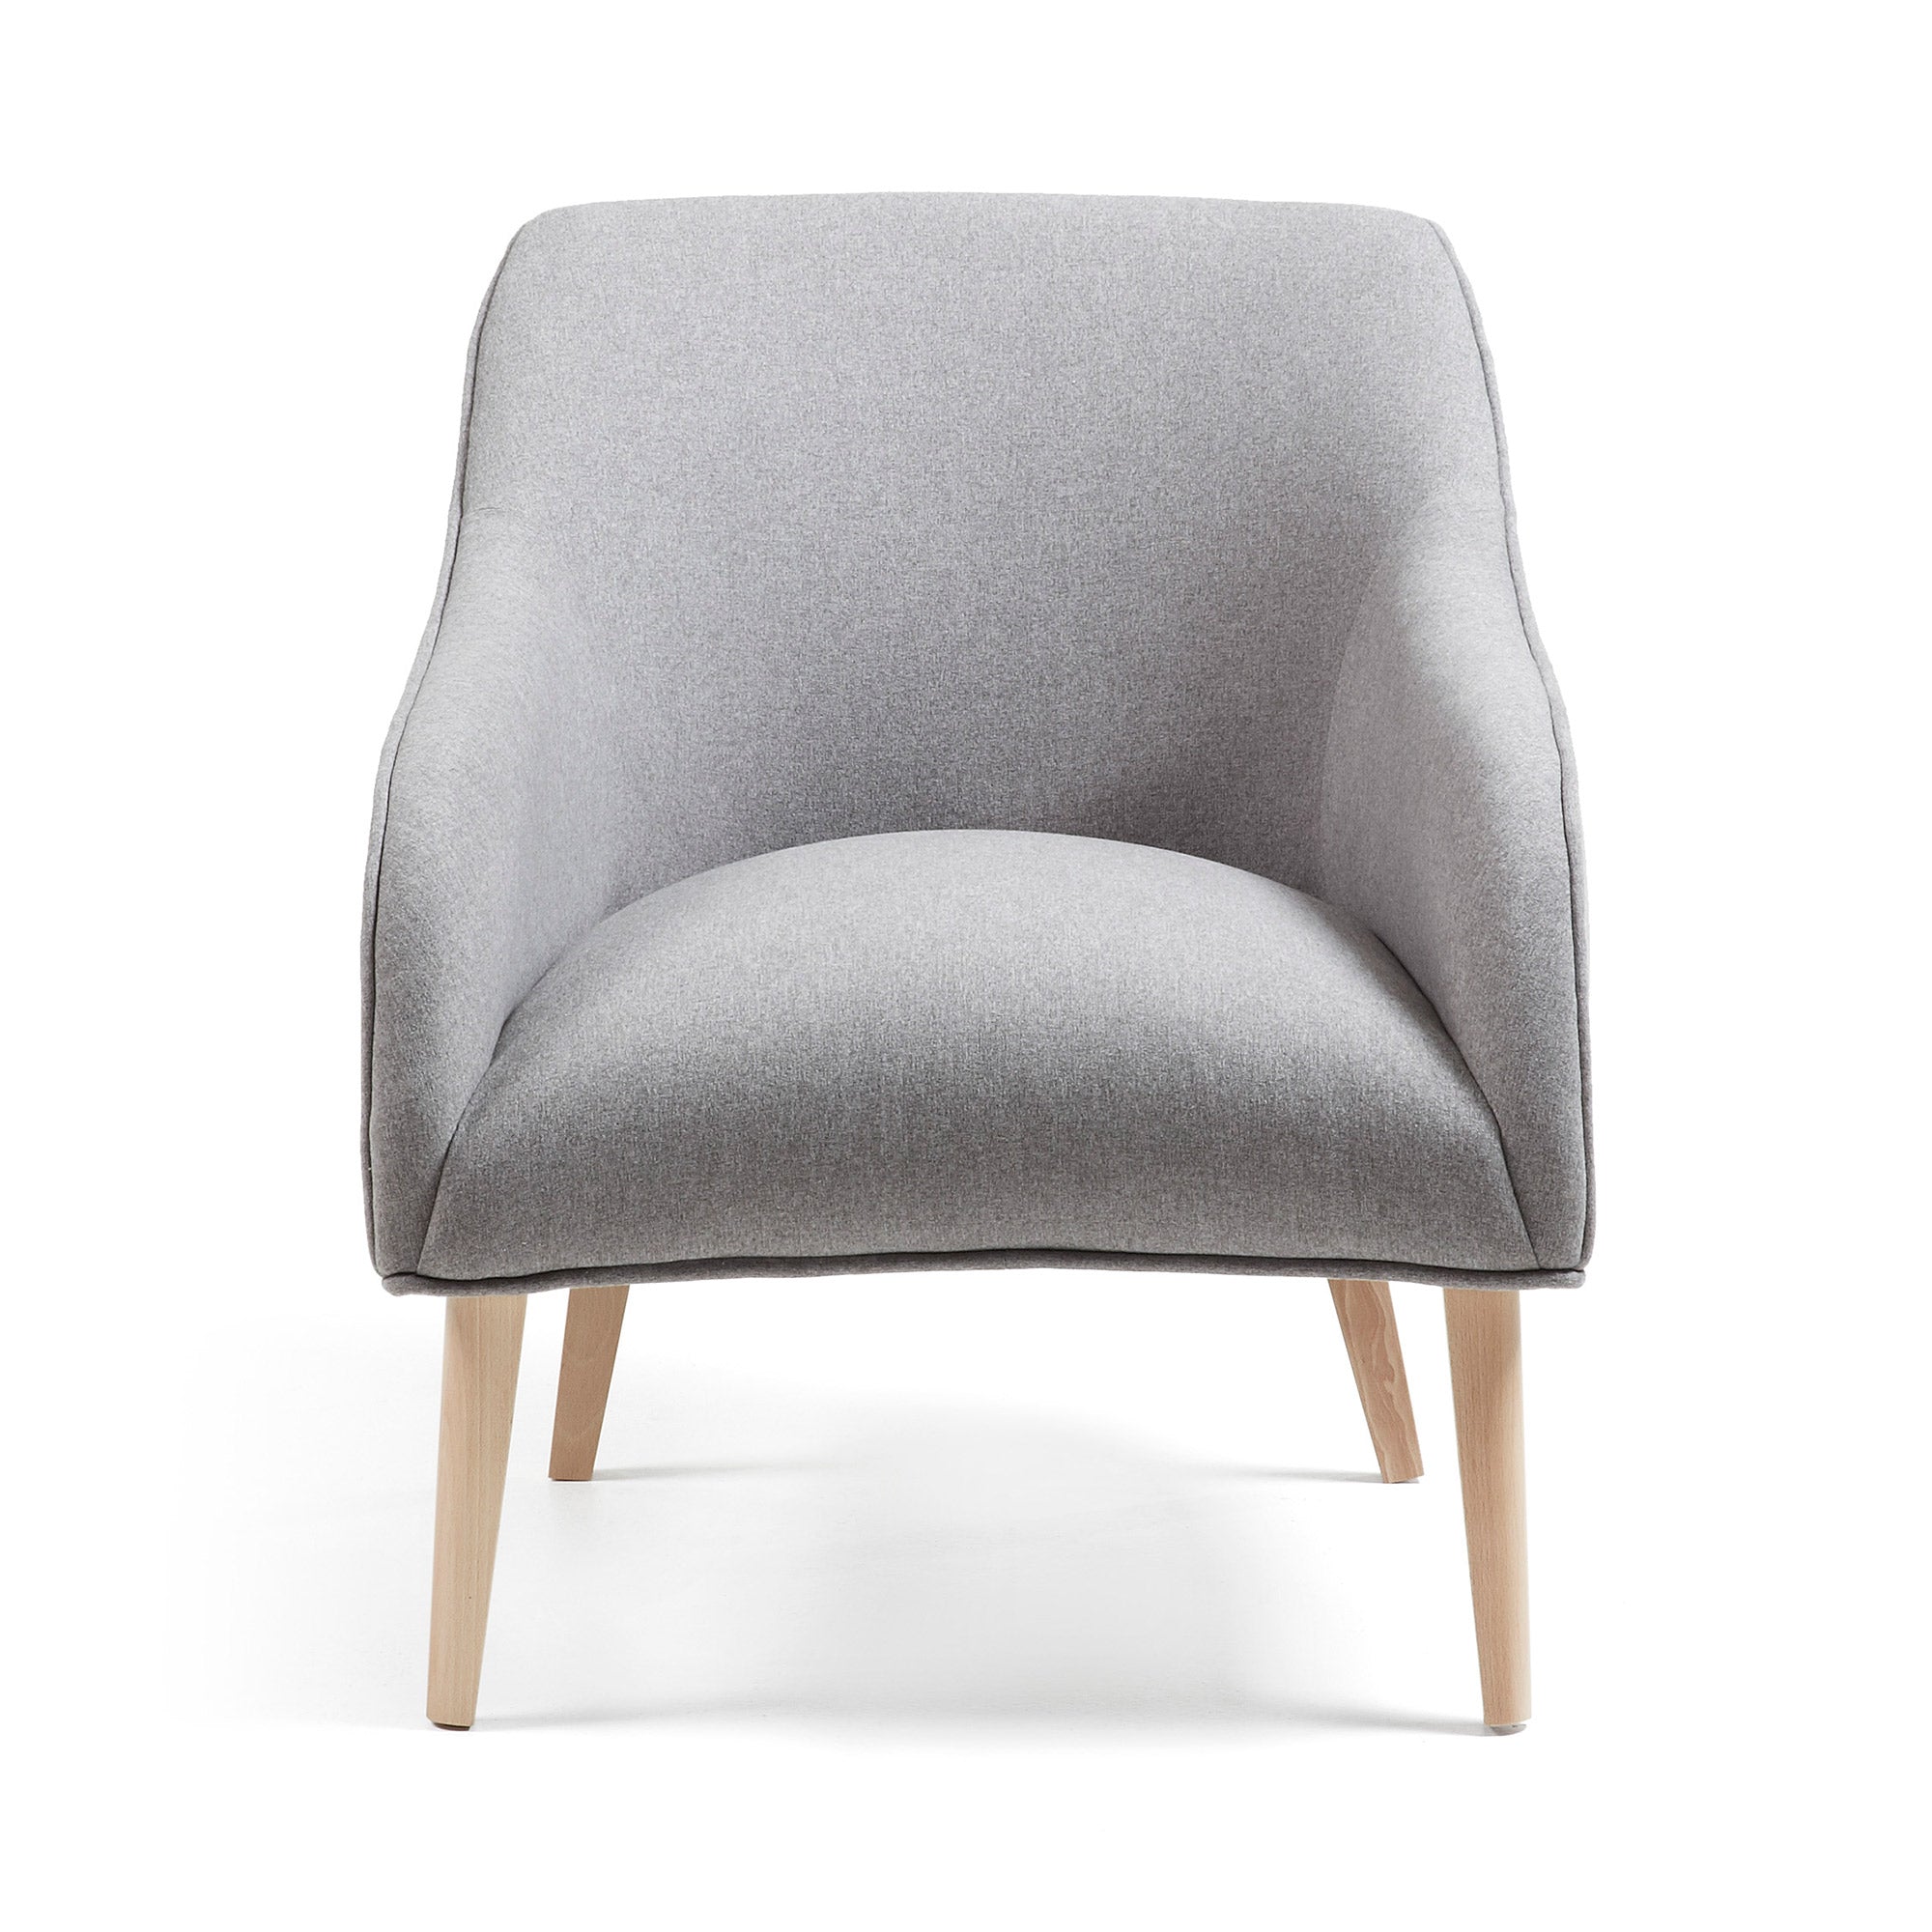 Bobly armchair in grey with wooden legs with natural finish